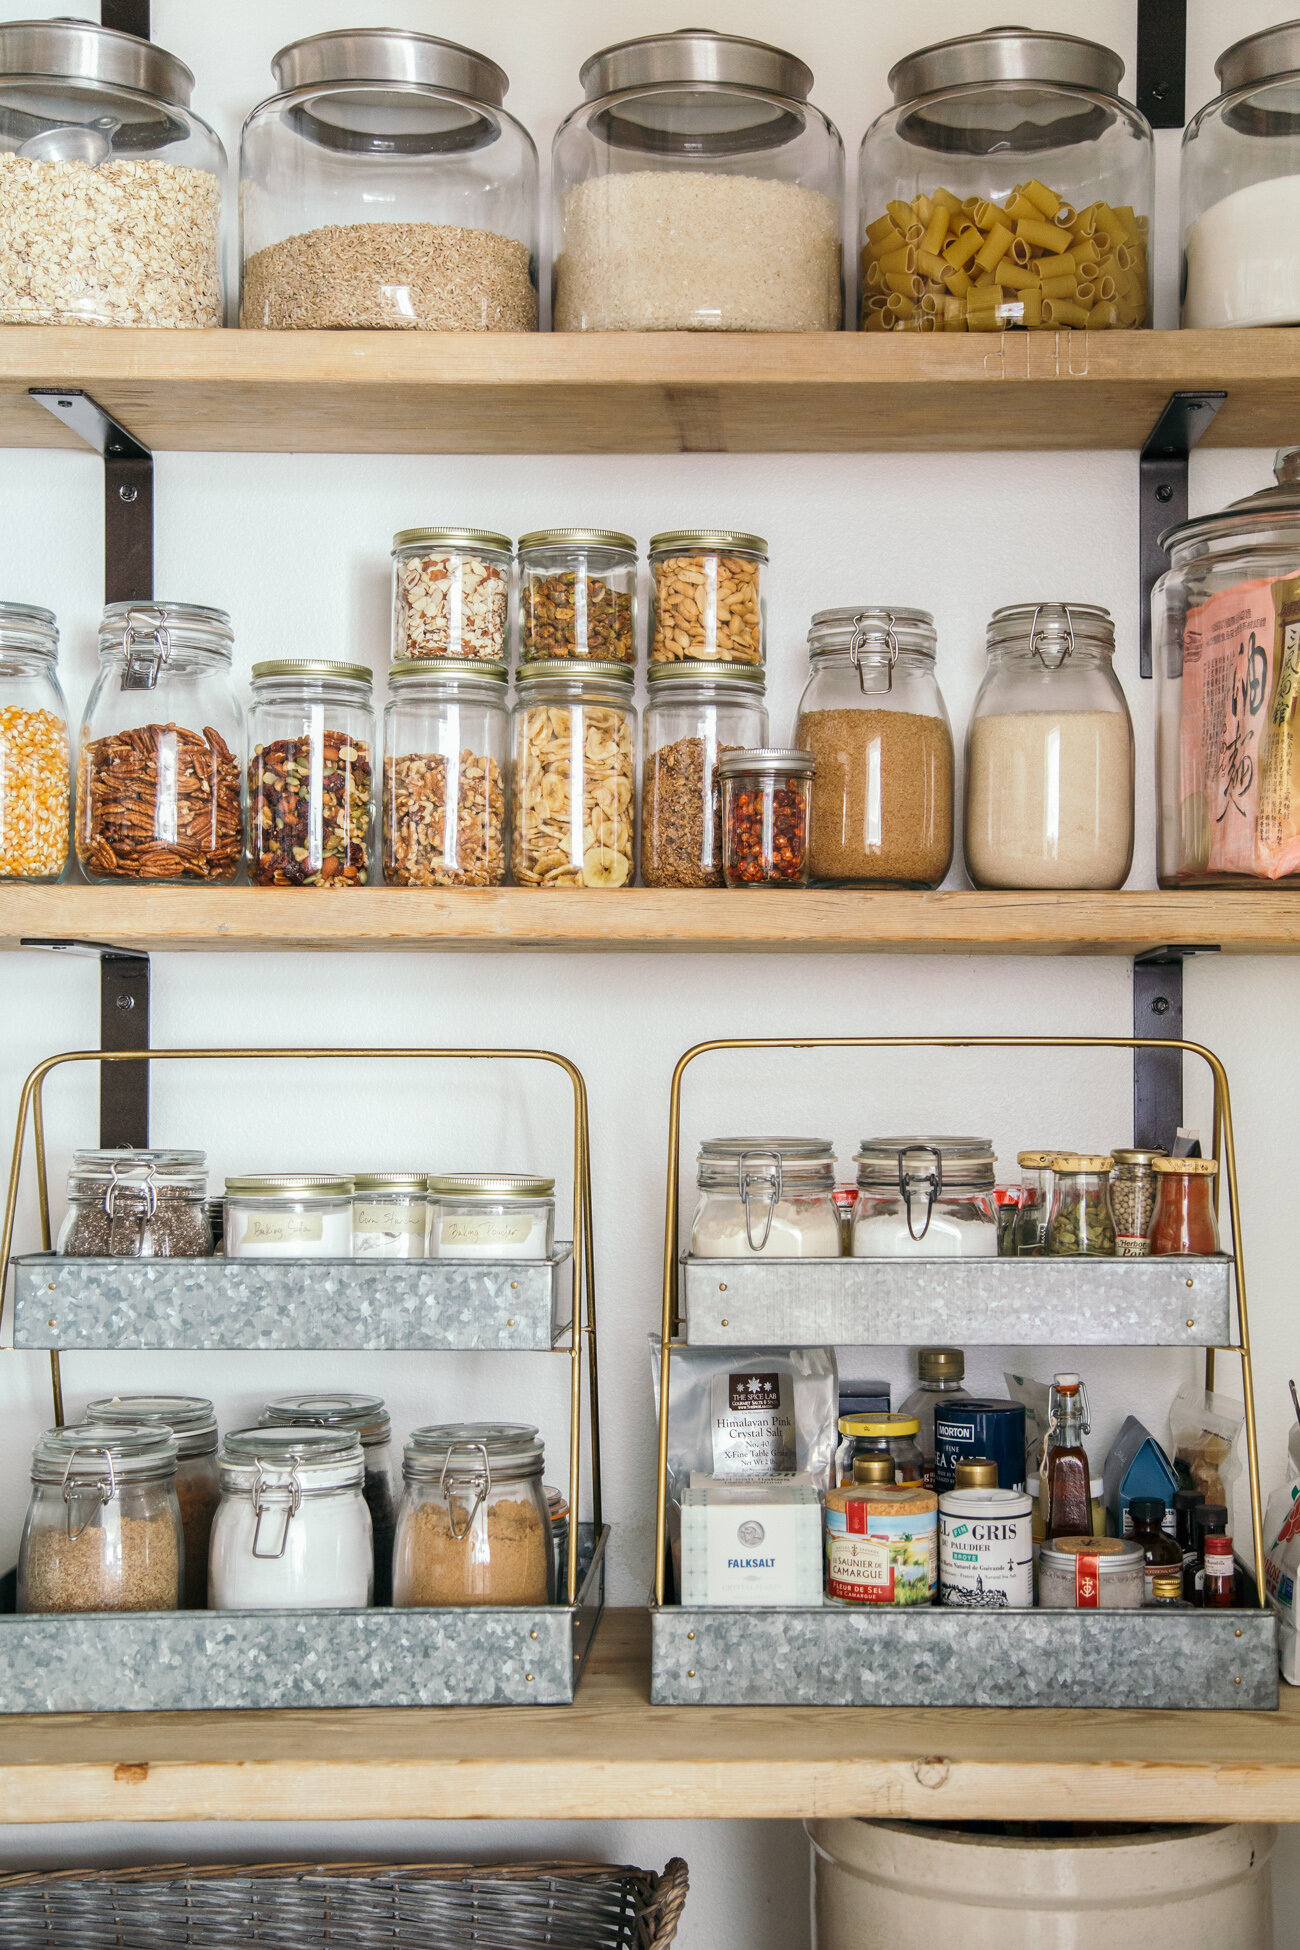 Pink Spice Rack with Glass Jars